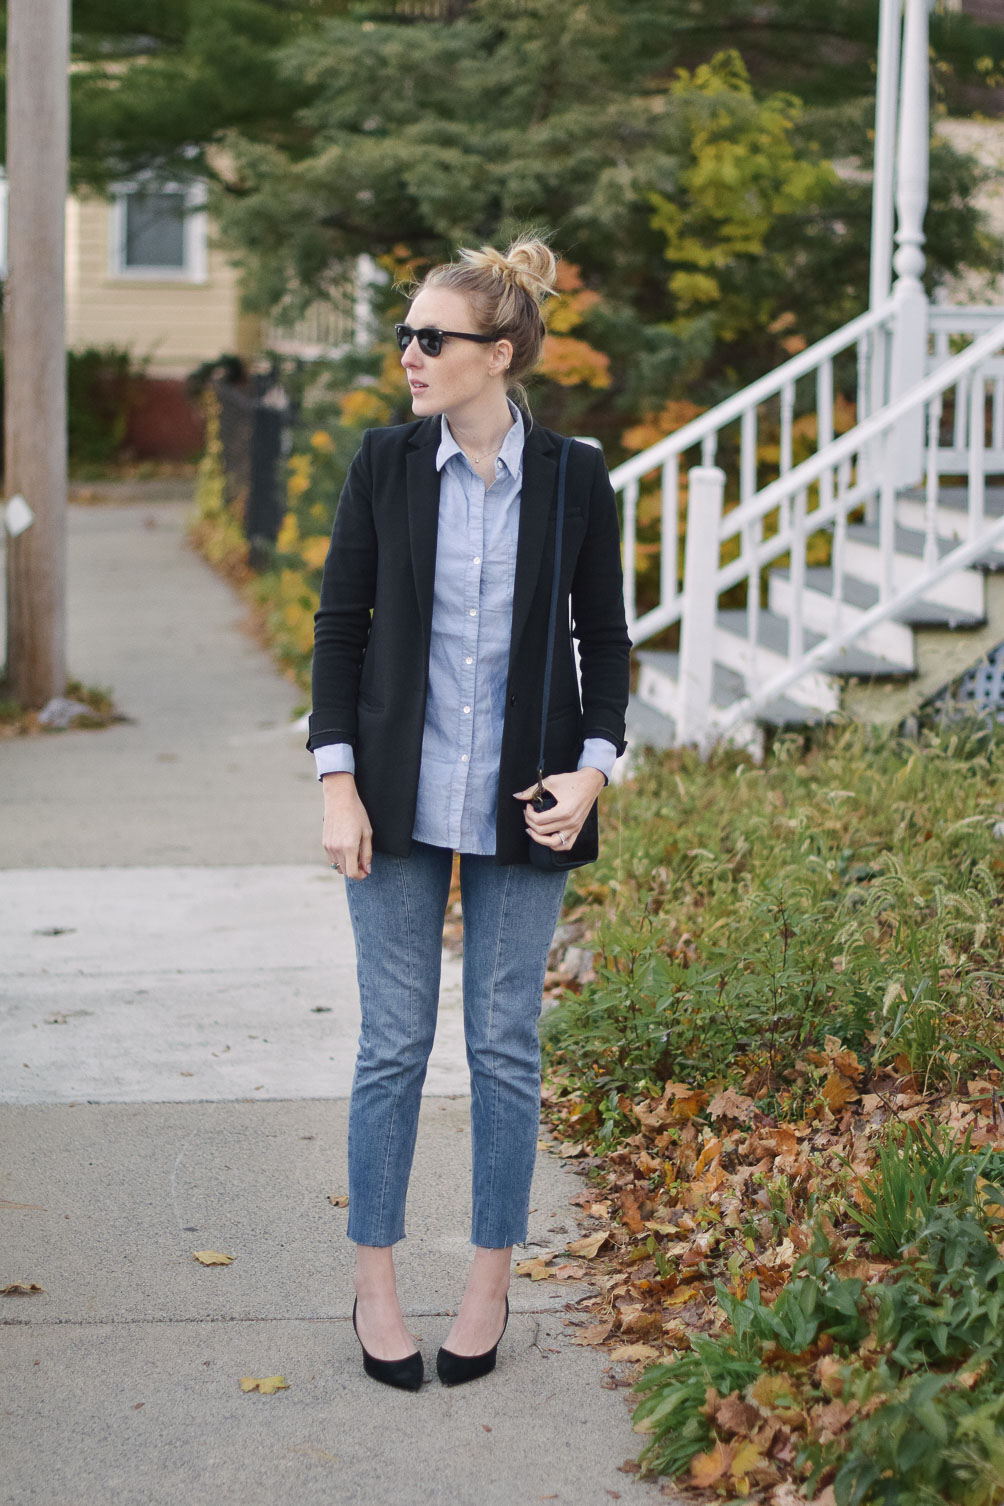 styling a fall blazer outfit with blue jeans and black suede slingback heels